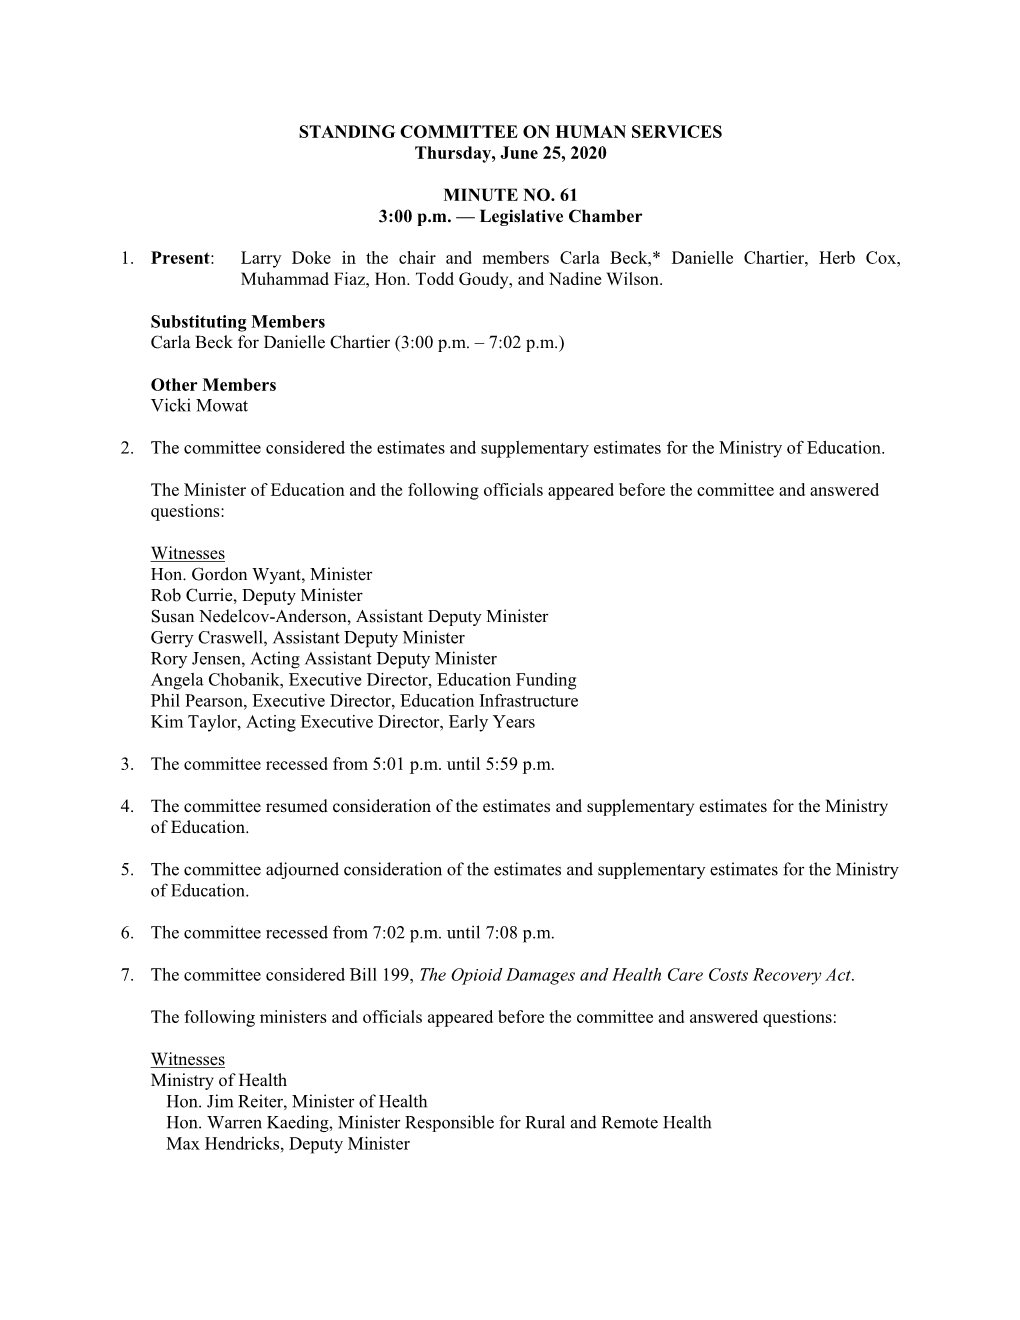 STANDING COMMITTEE on HUMAN SERVICES Thursday, June 25, 2020